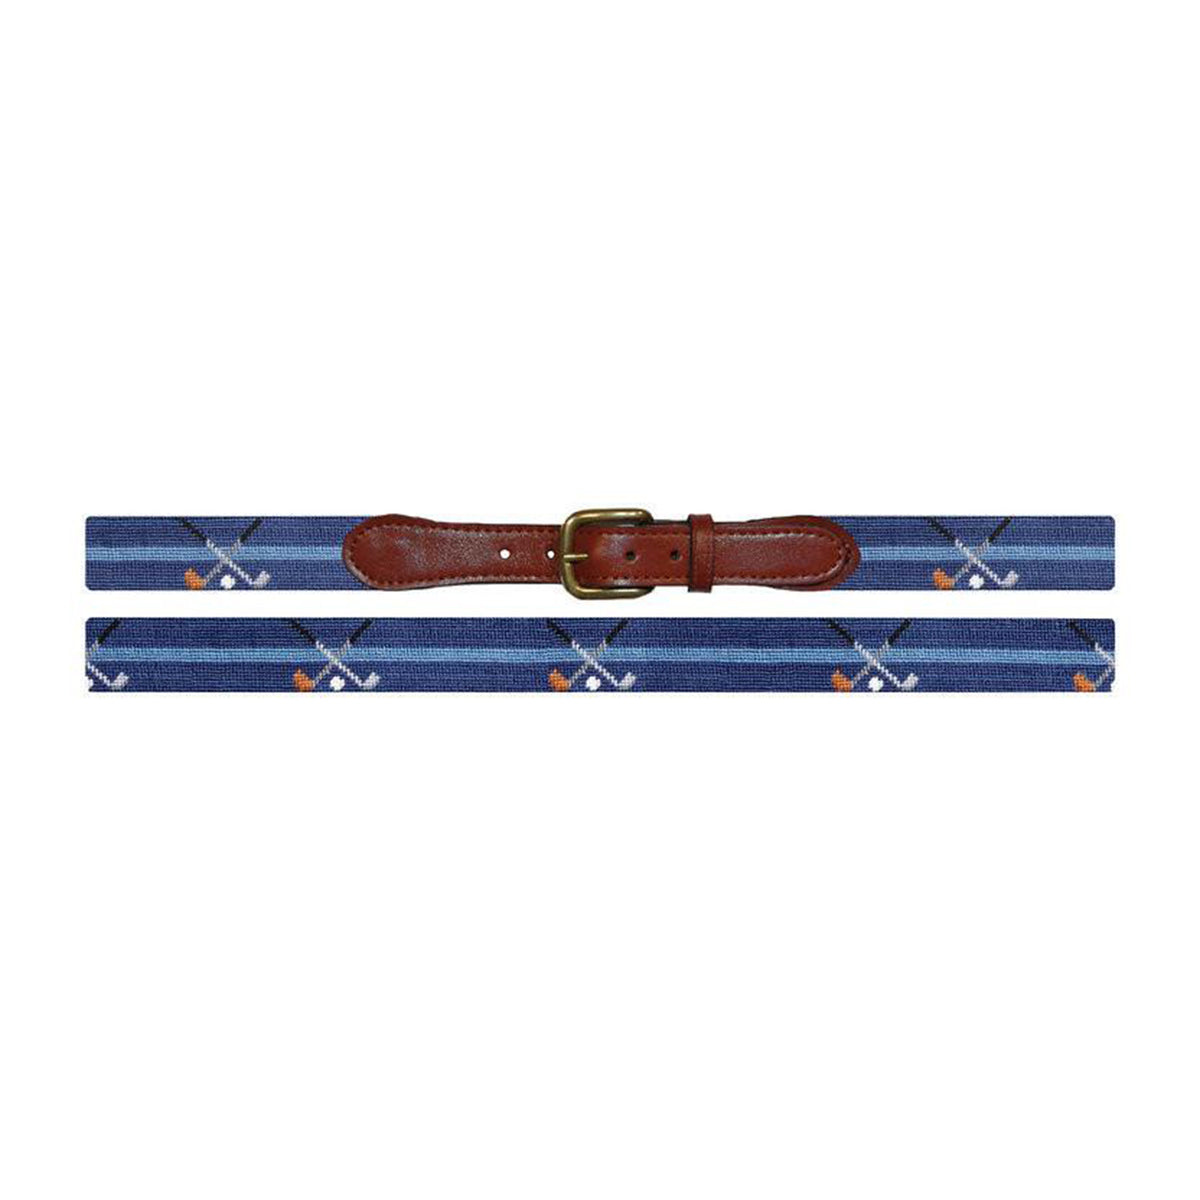 Crossed Clubs Needlepoint Belt - All She Wrote